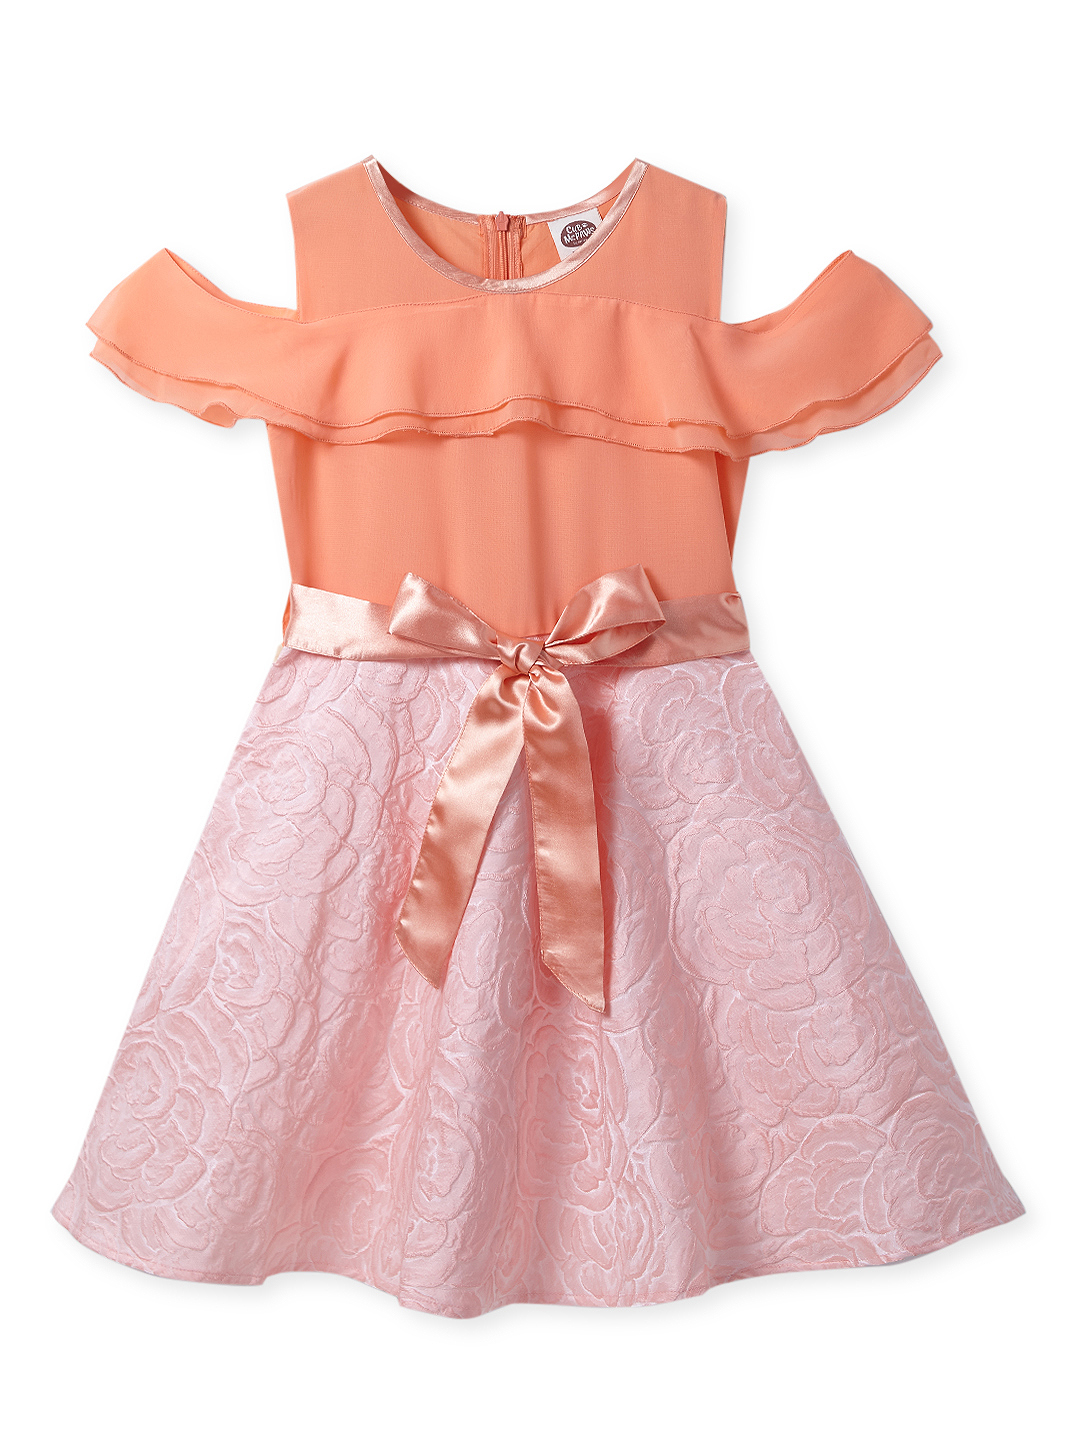 Girls Peach Party Wear Frock Cold Shoulder with Satin Belt